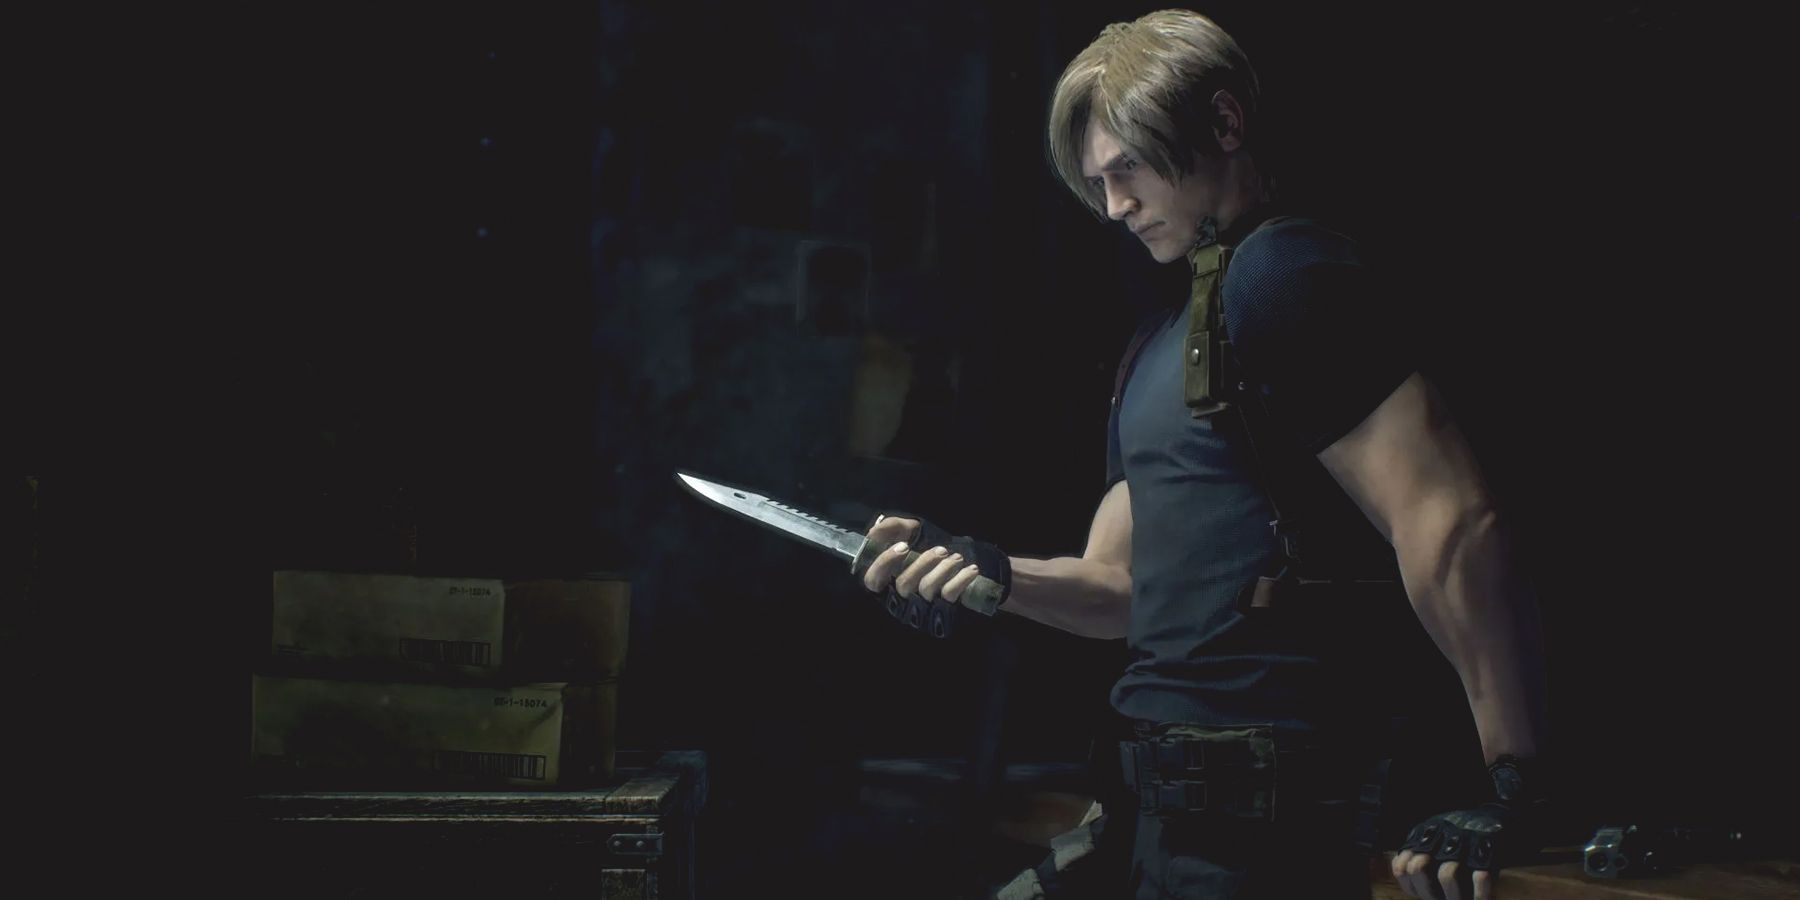 Resident Evil 4 Leon S. Kennedy looks at a knife